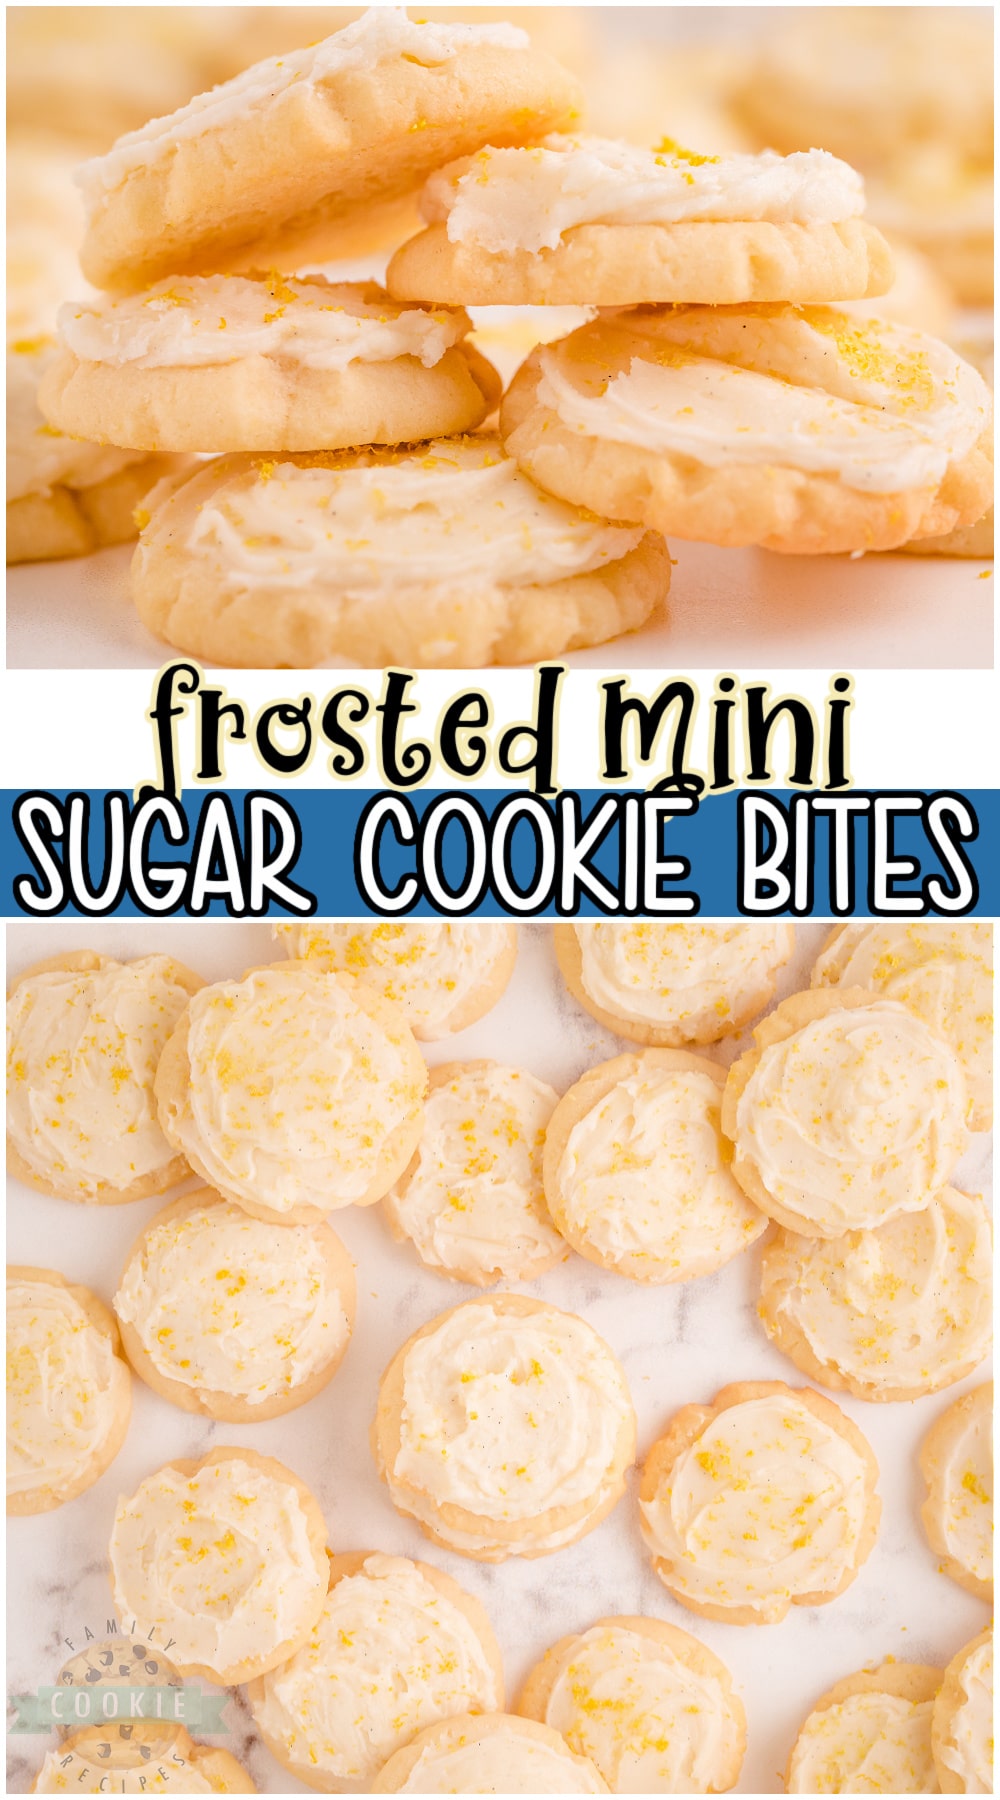 Frosted Mini Sugar Cookie Bites are cute & tasty one-bite soft sugar cookies! Simple cookie recipe that's perfect for a crowd! The creamy frosting is a must!